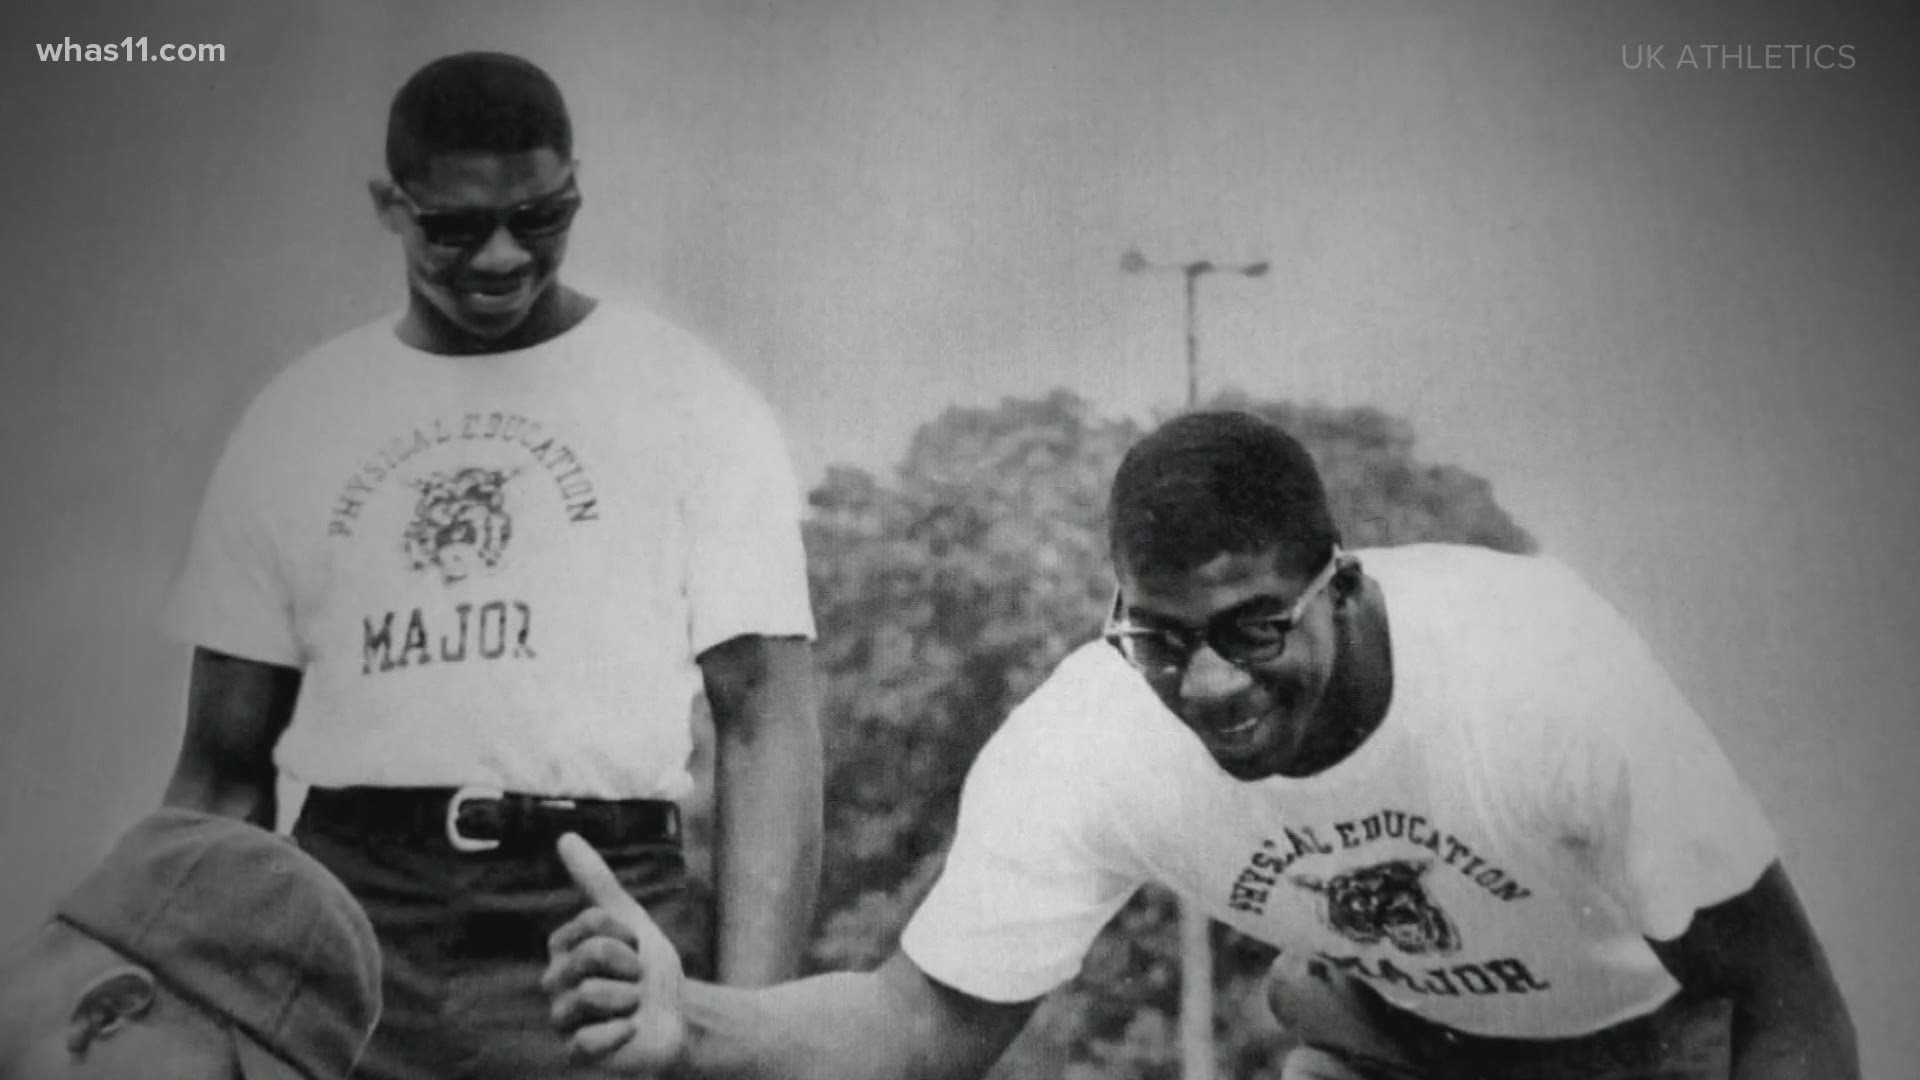 Northington was one of the first Black football players to play in the SEC when he played for the University of Kentucky in the 1960s.